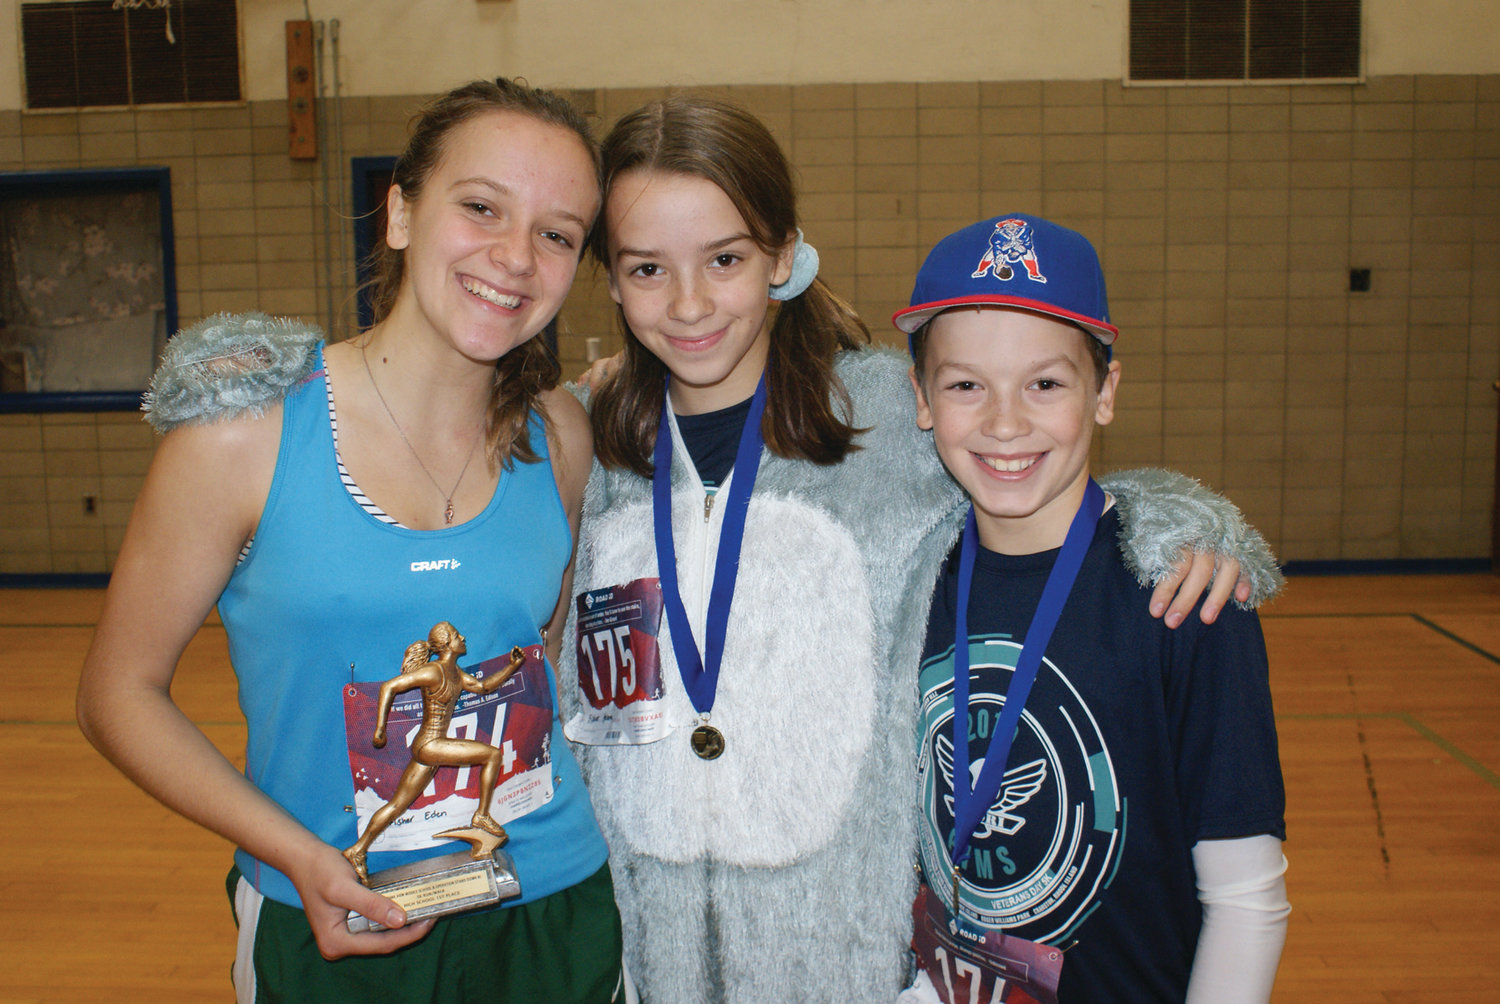 WINNING SMILE: Eden Fisher, a senior at Cranston High School East, won first place in girls high school category with a time of 21 minutes, 32 seconds. She celebrated with siblings Helena and Harrison.